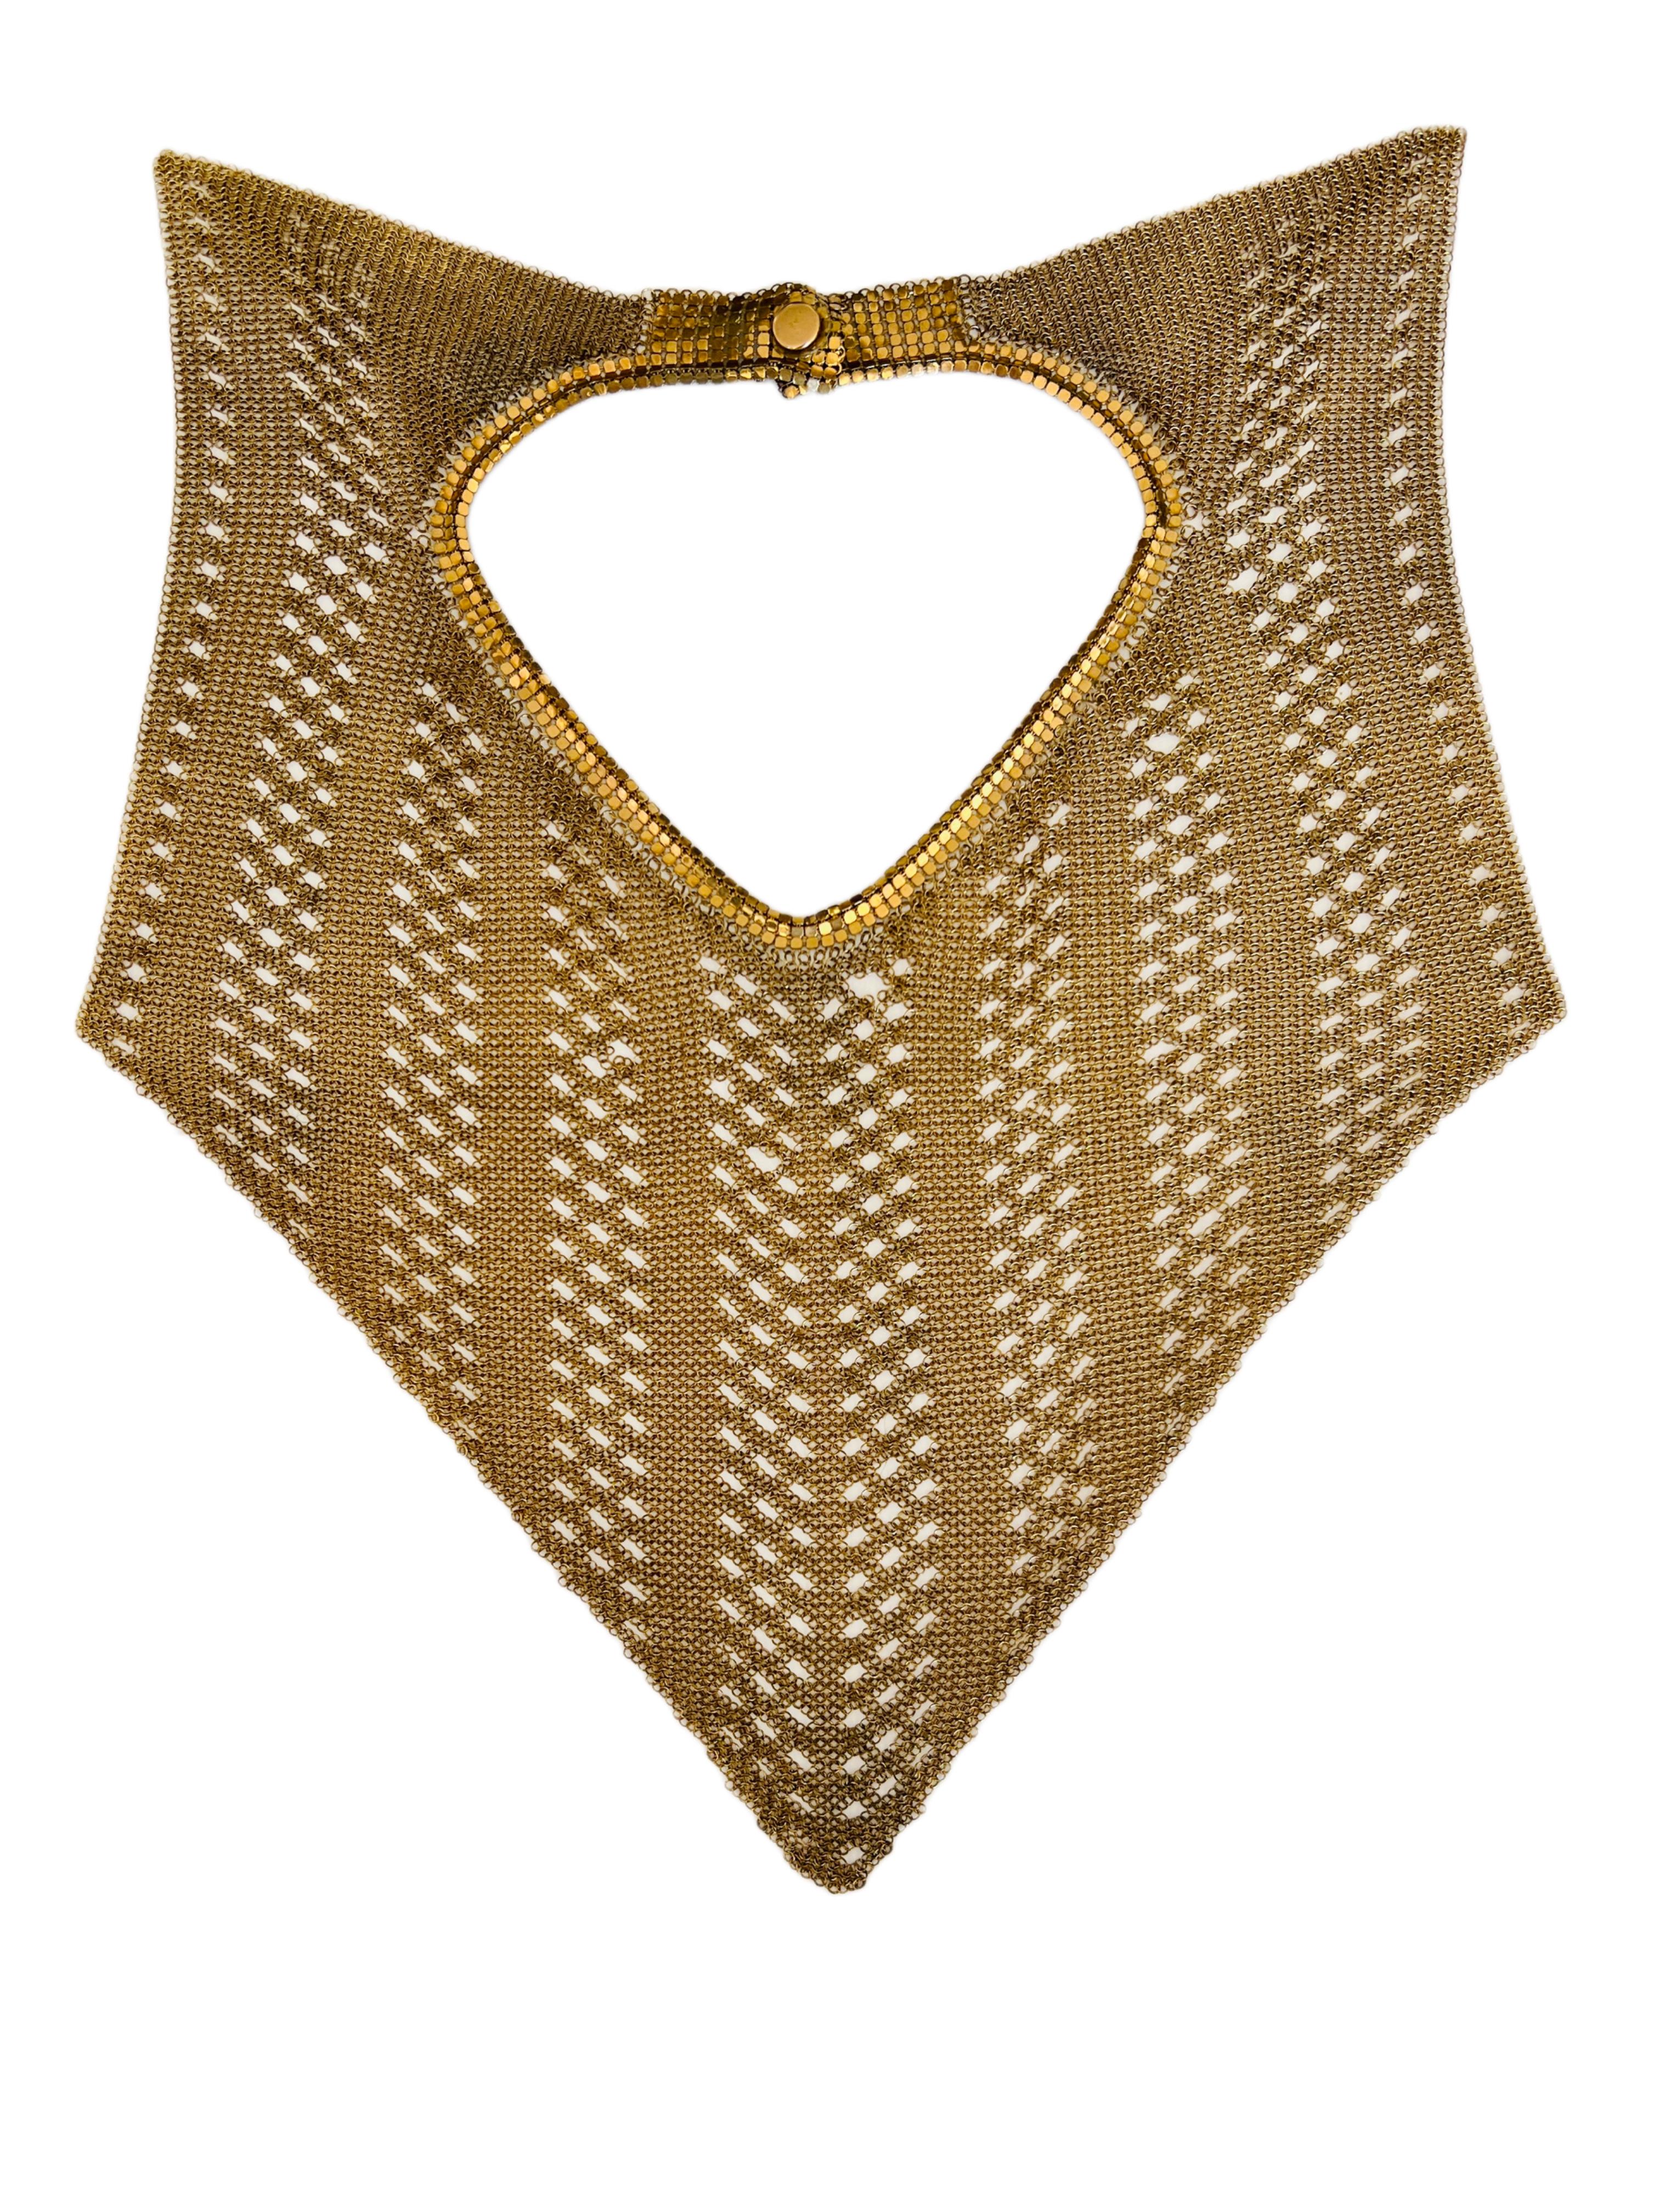 Fabulous and rare gold mesh necklace featuring an open chain maille that drapes nicely over the shoulders and décolletage. 

Size: Approximately 12.5